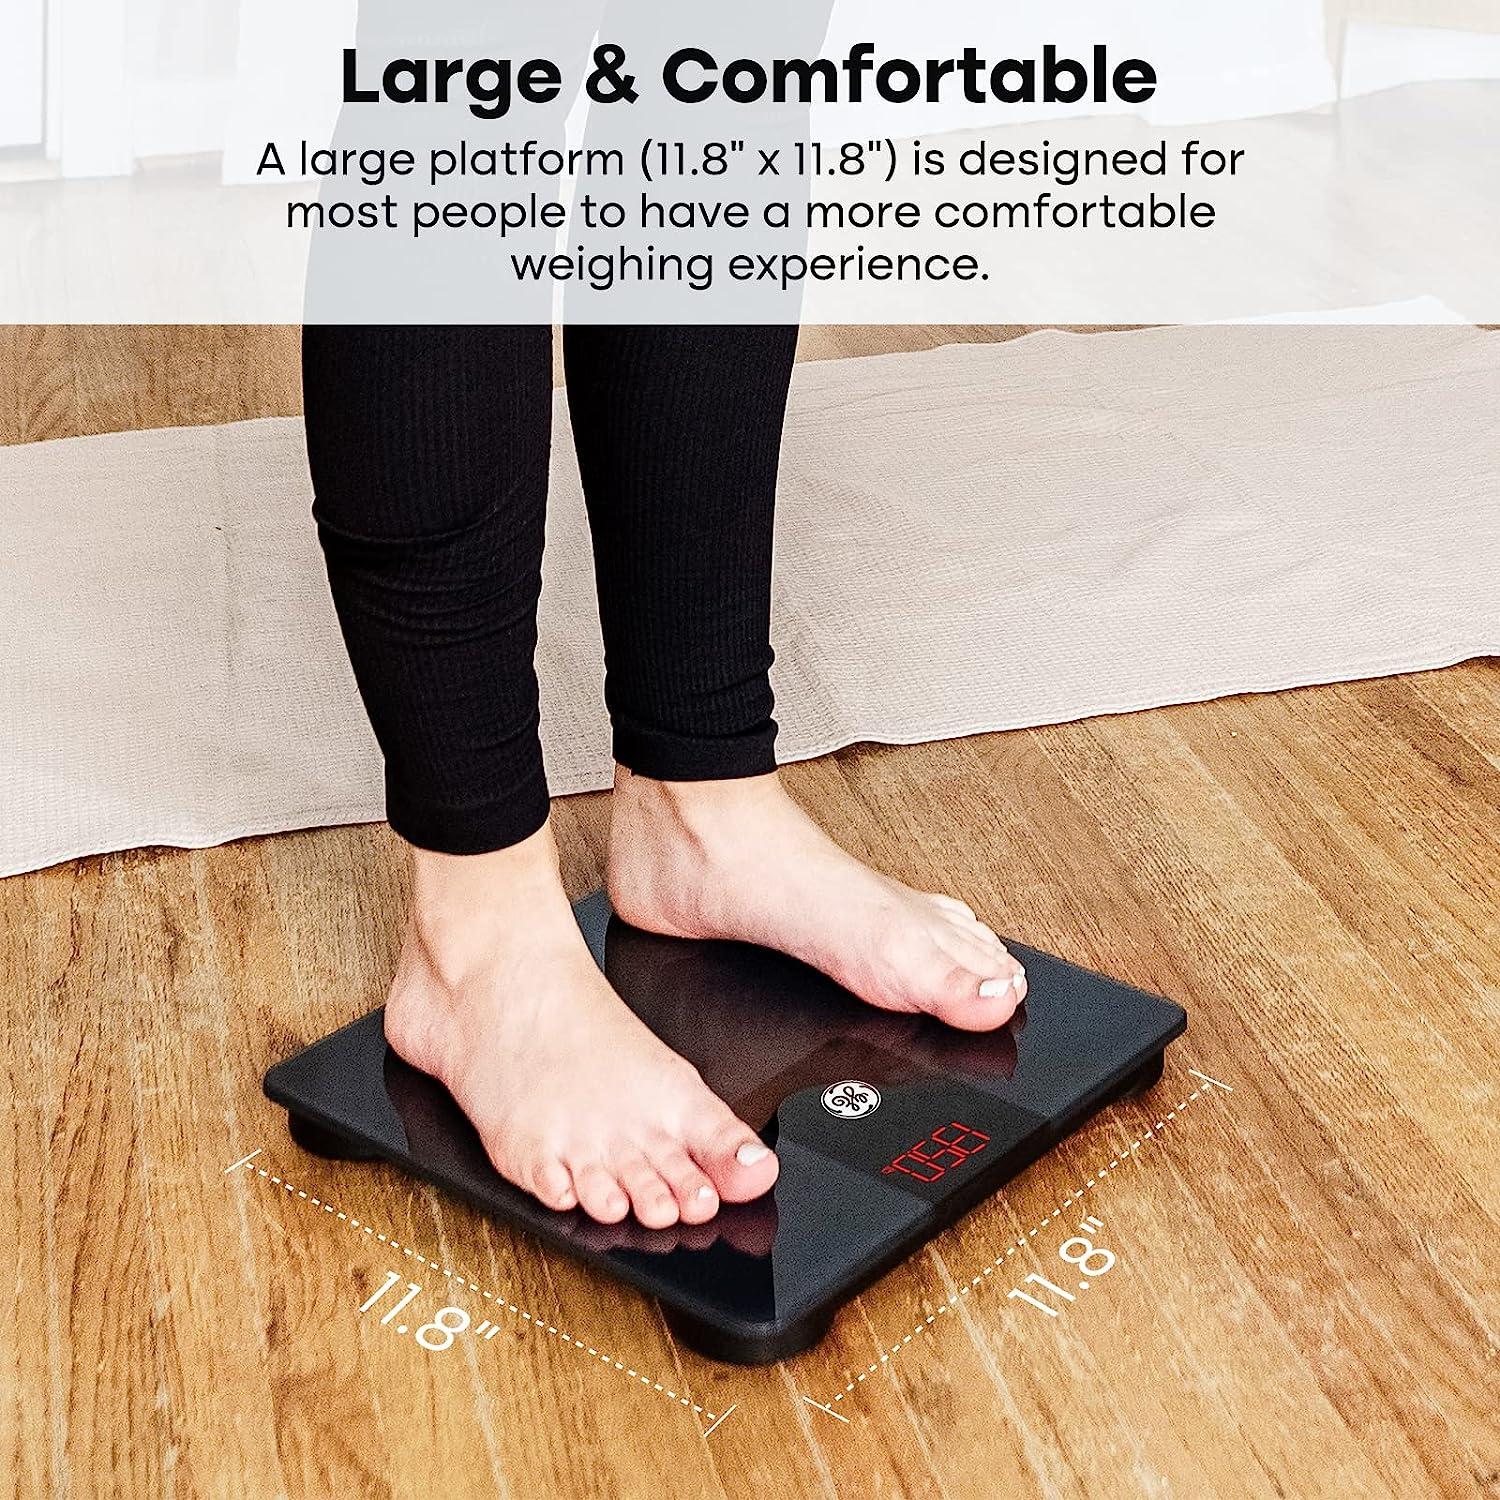 Digital Body Weight Scale, Bathroom Weighing Scale Large LED